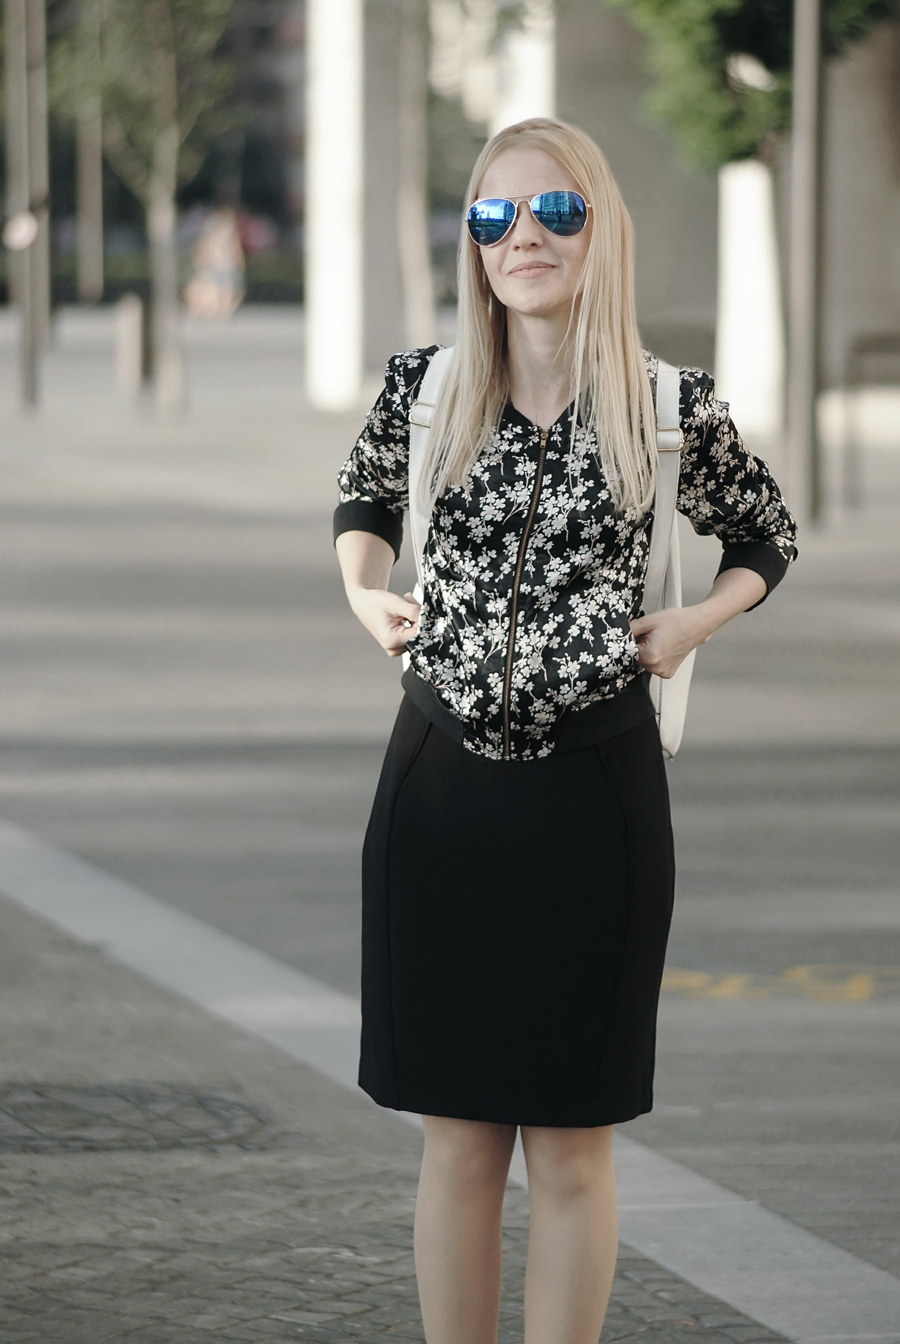 3 ways to wear the black pencil dress, city chic, floral bomber, little black dress, leopard skaters, white backpack, mirrored aviators